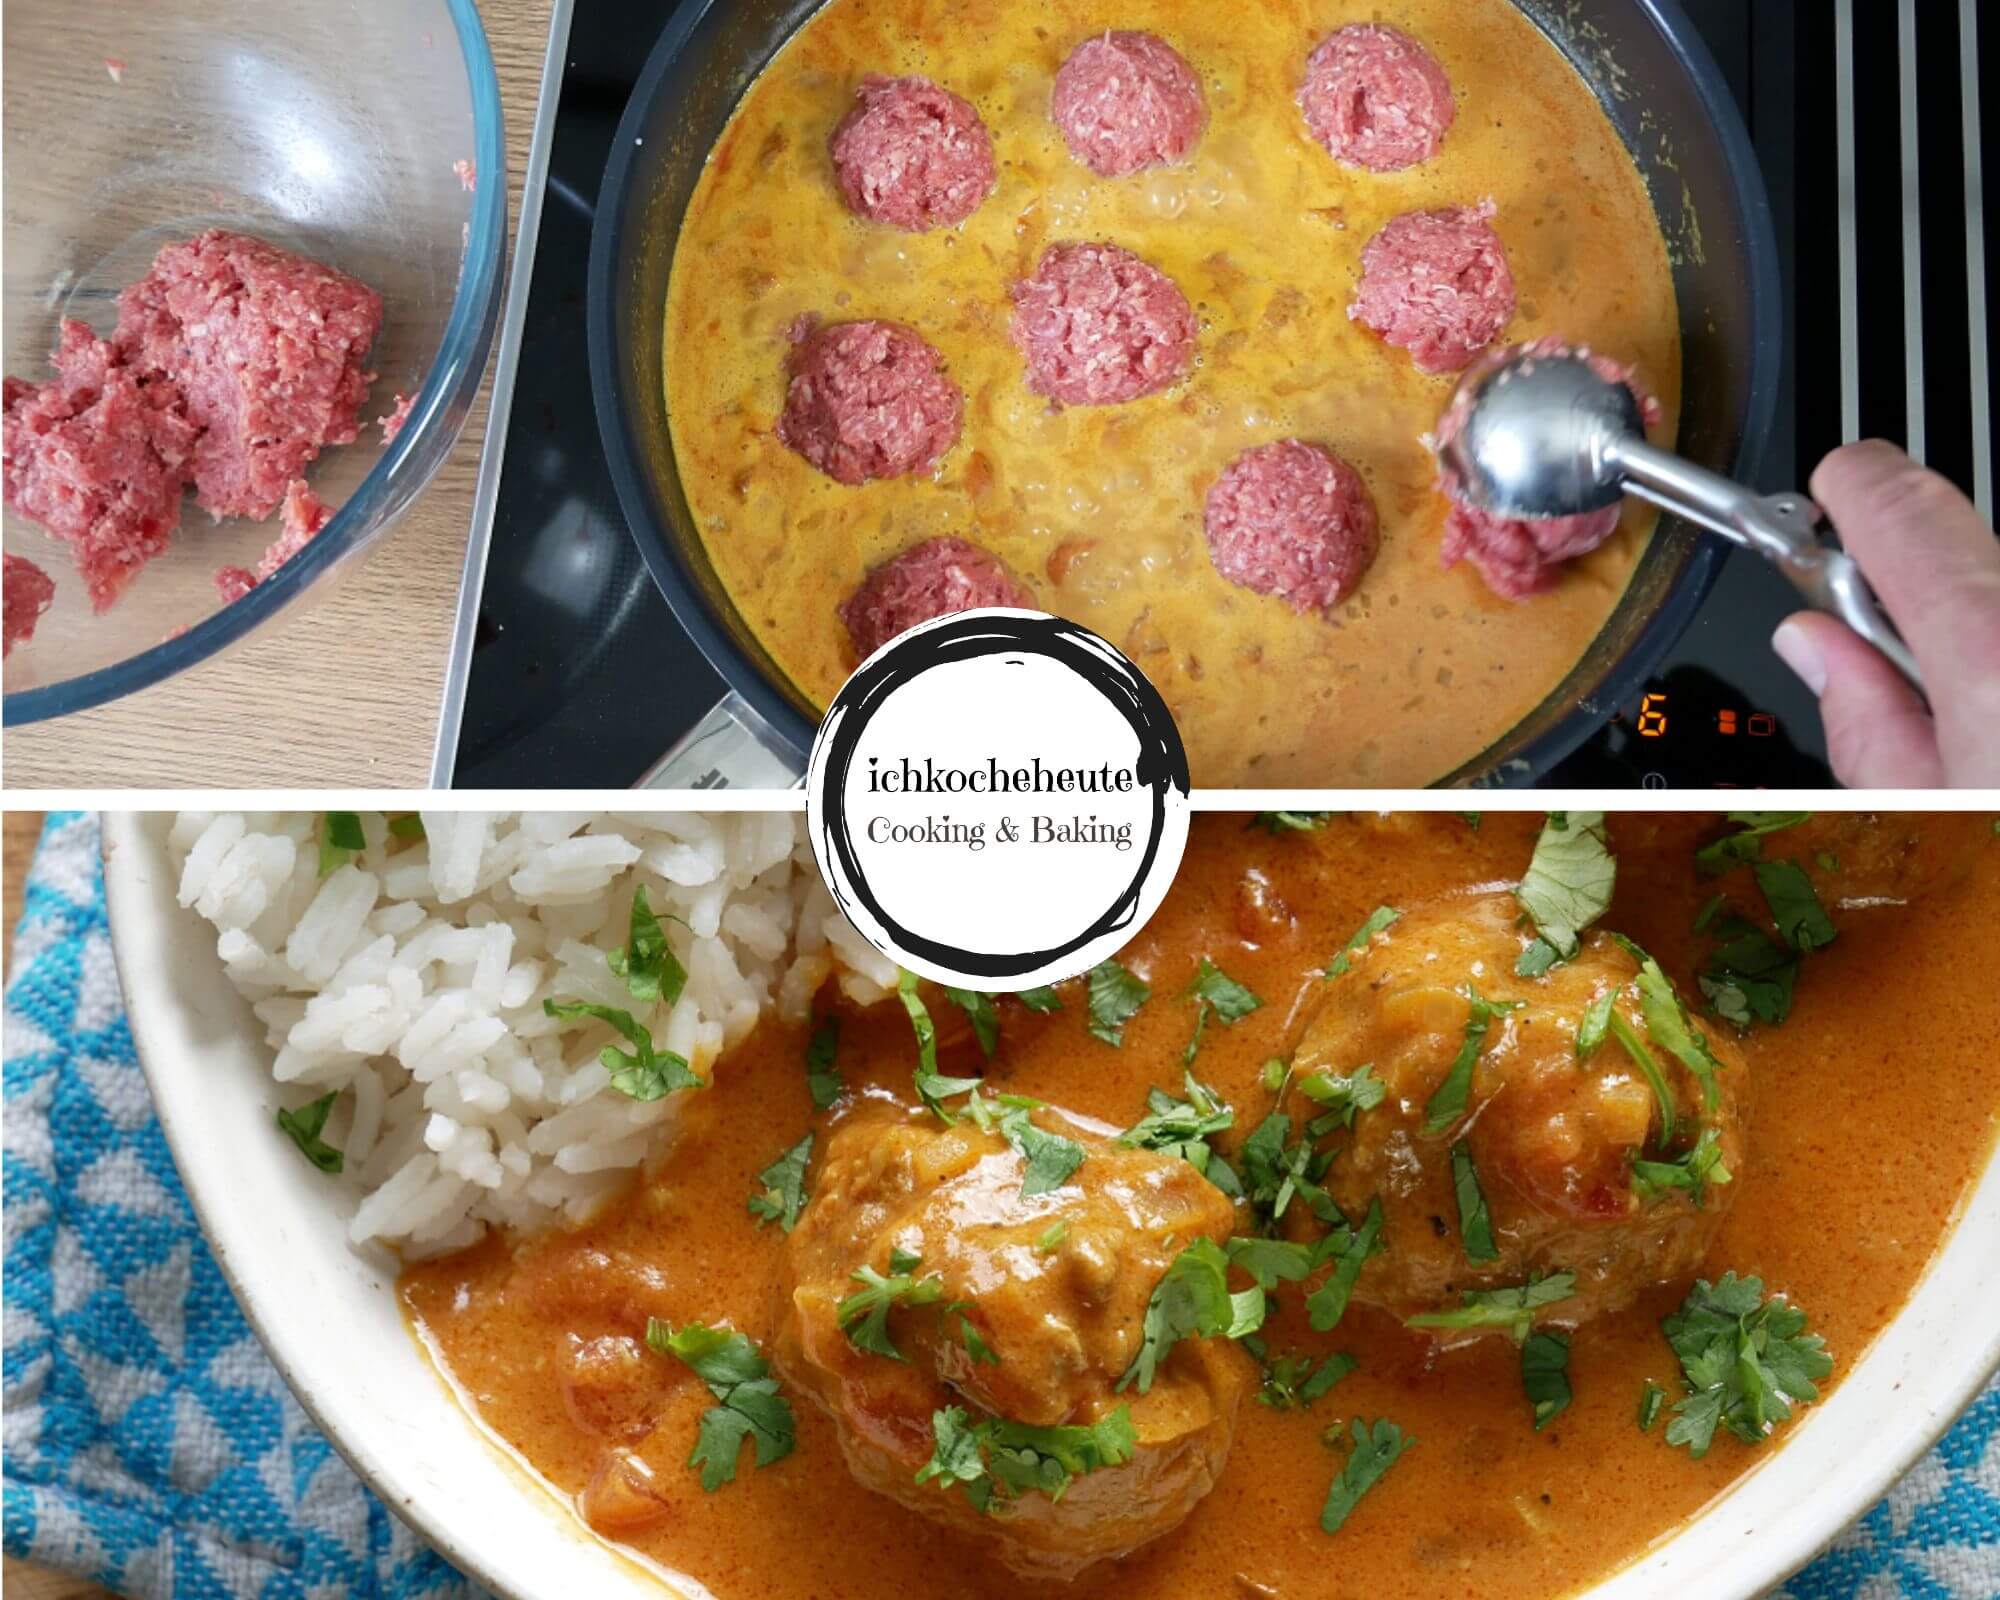 Serving Meatballs with Coconut Tomato Sauce